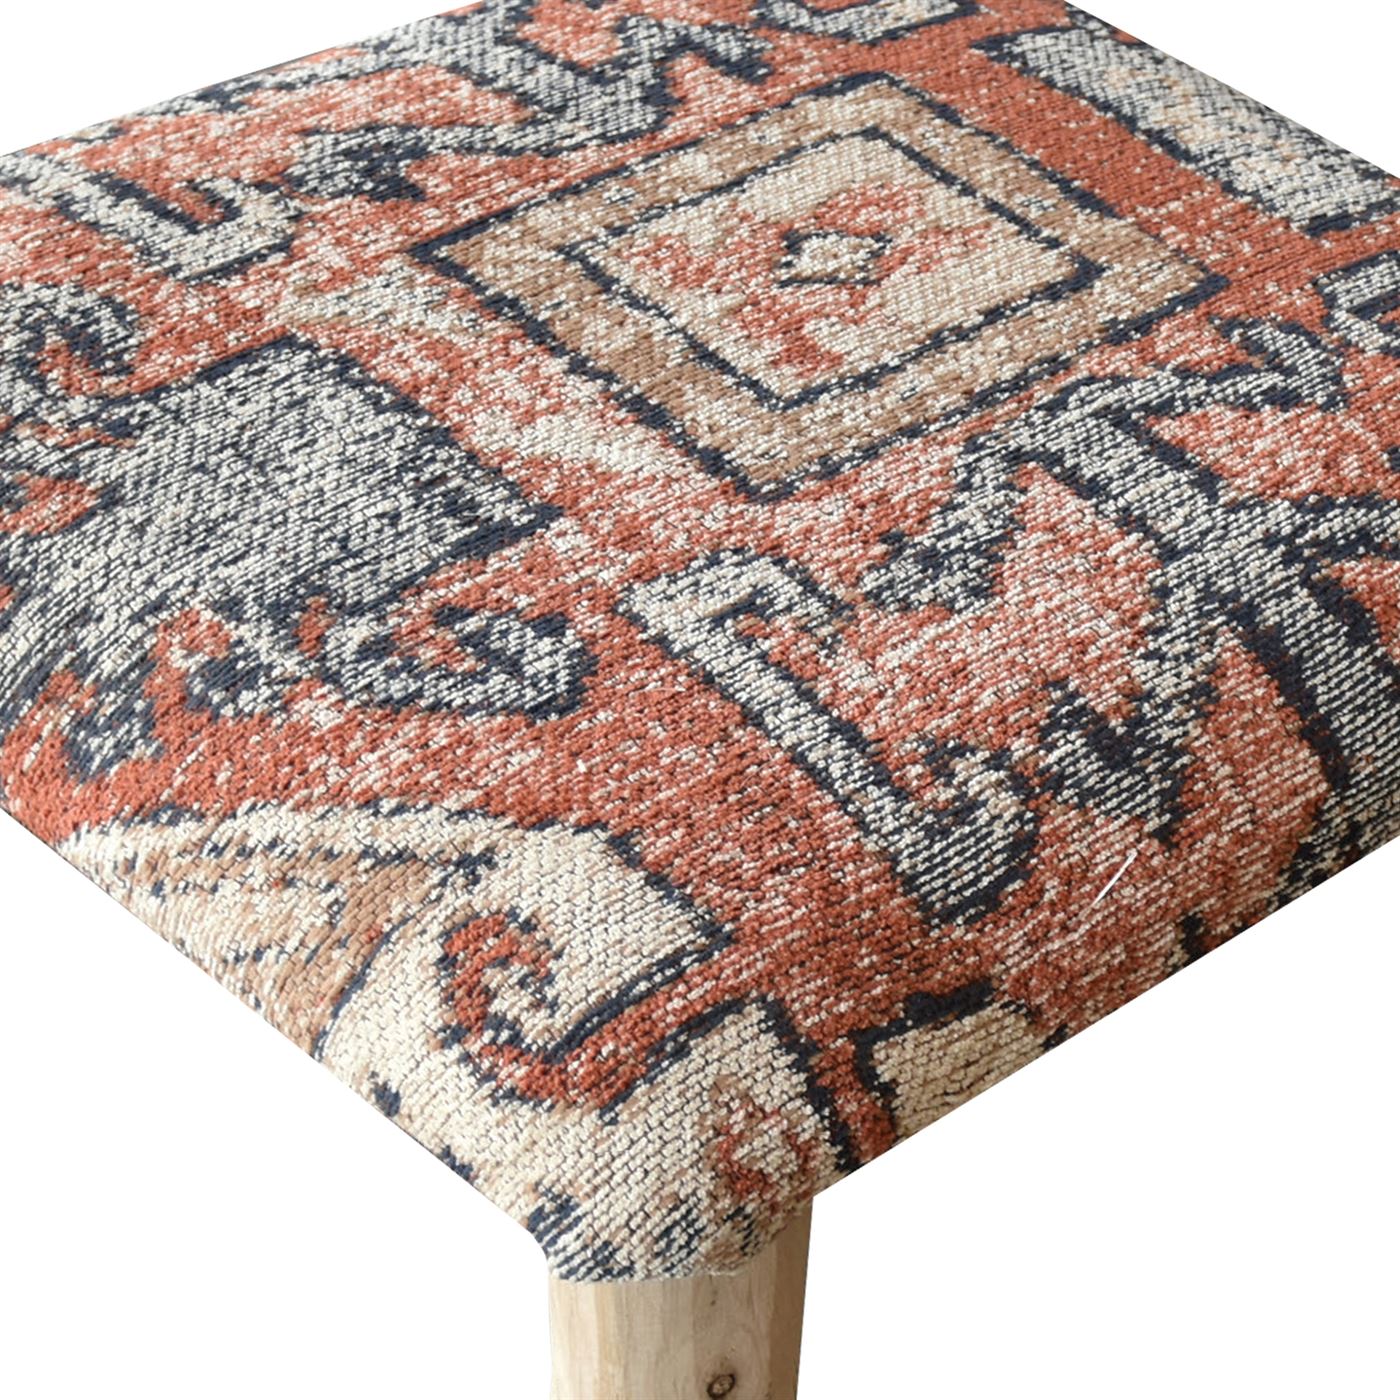 Dufex Foot Stool, Cotton Chenille, Multi, Jaquard Durry, Flat Weave